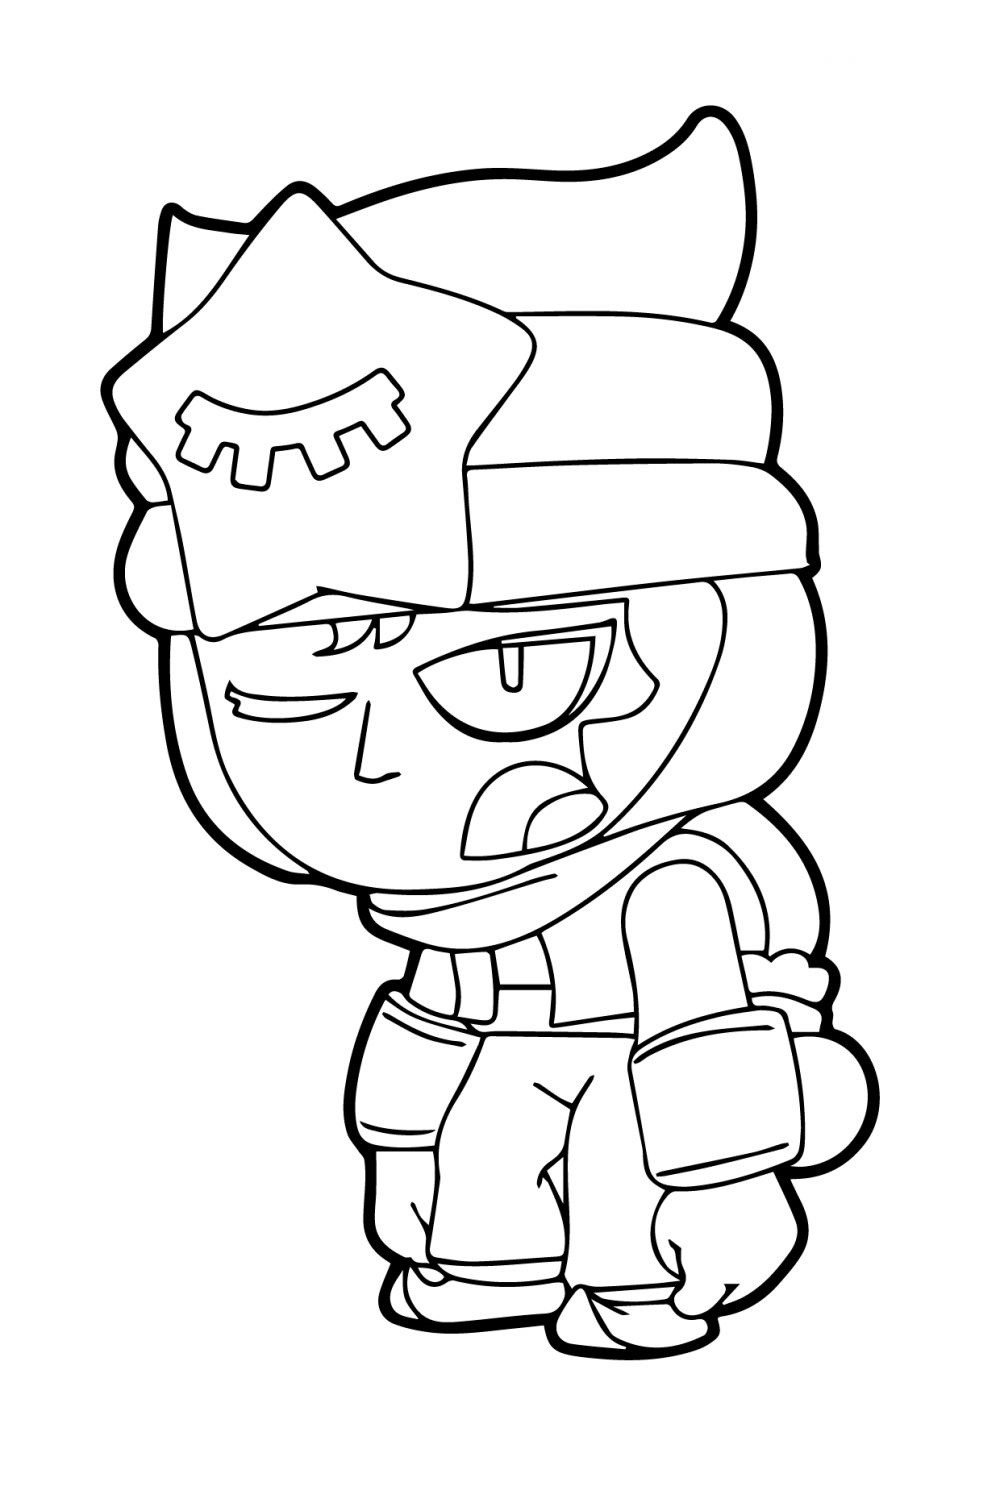 Sandy Coloring Pages Print Brawl Stars Character For Free - brawl stars image a imprimer